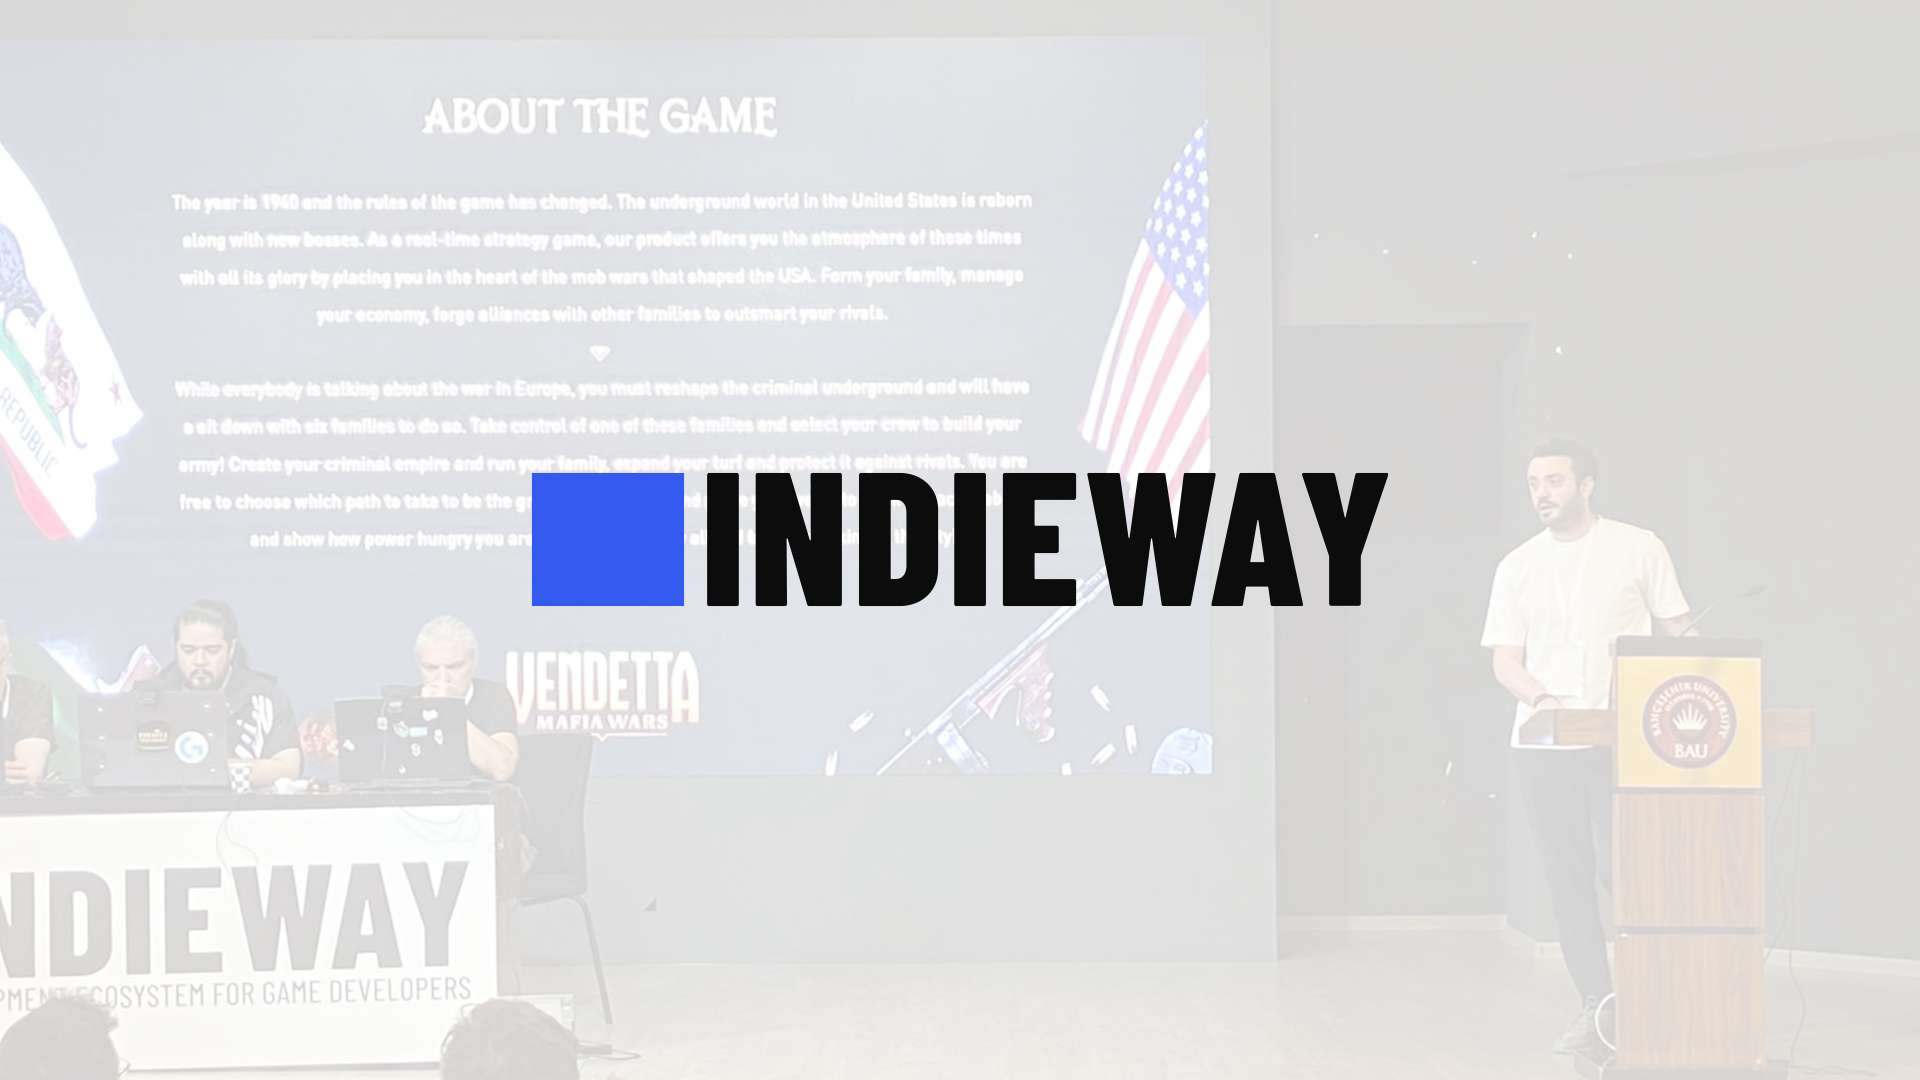 We are at INDIEWAY